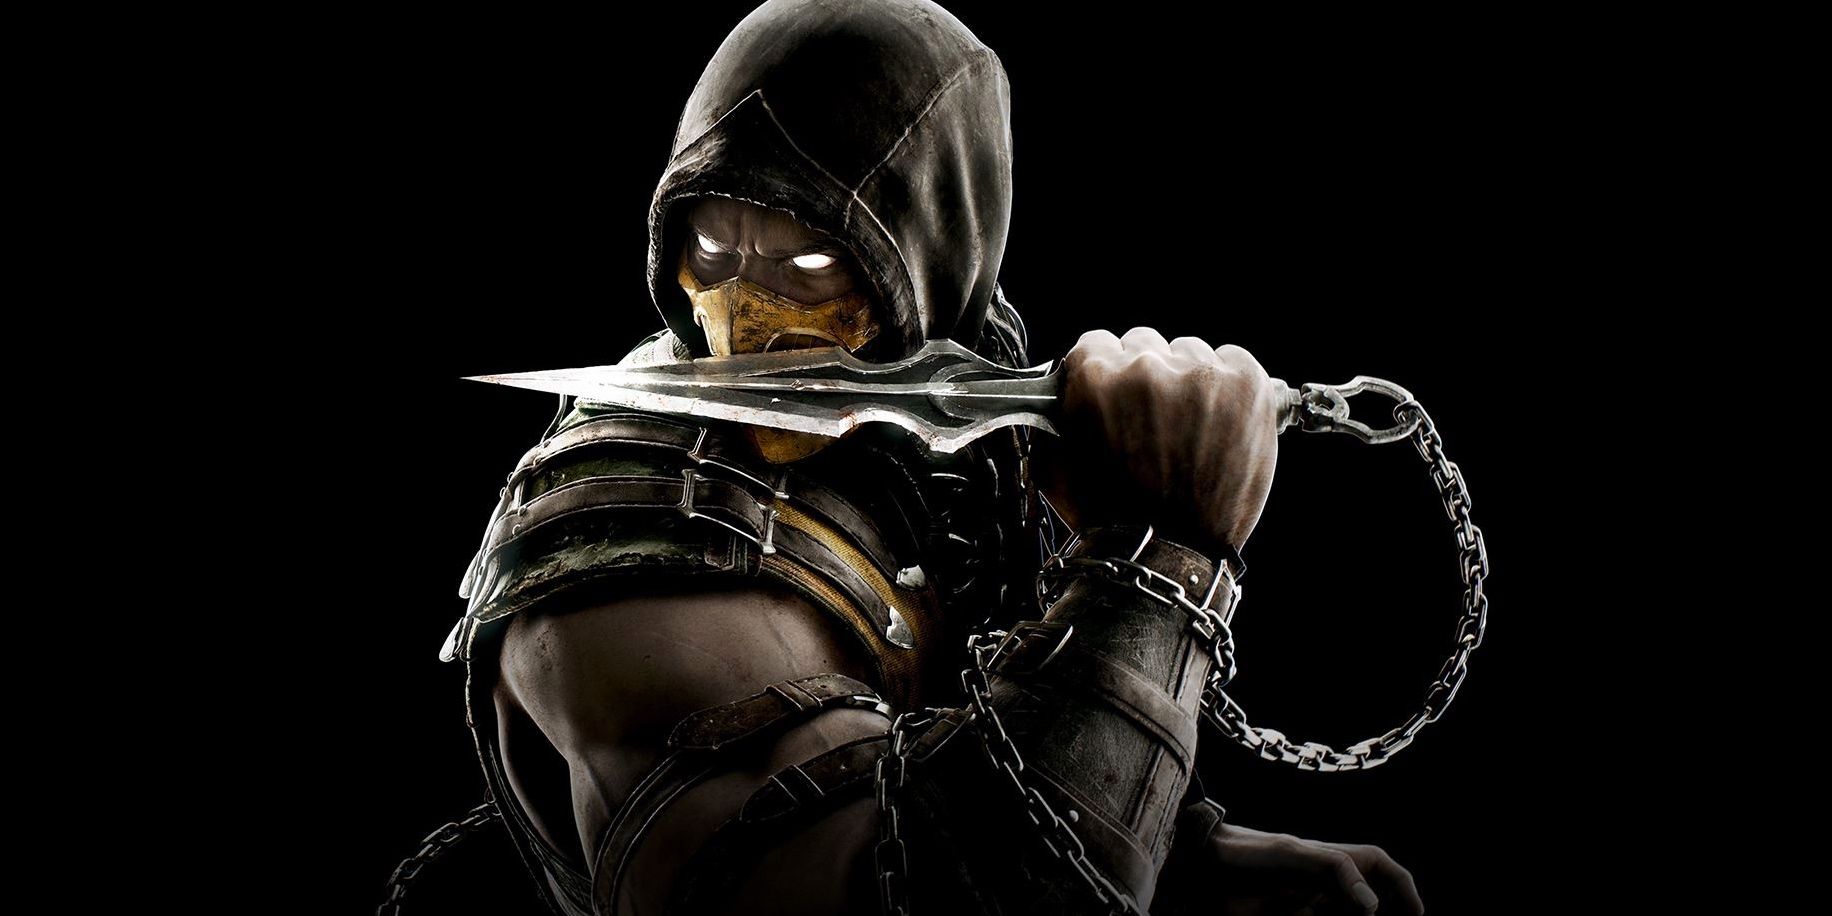 Scorpion from Mortal Kombat with his blade in front of his face